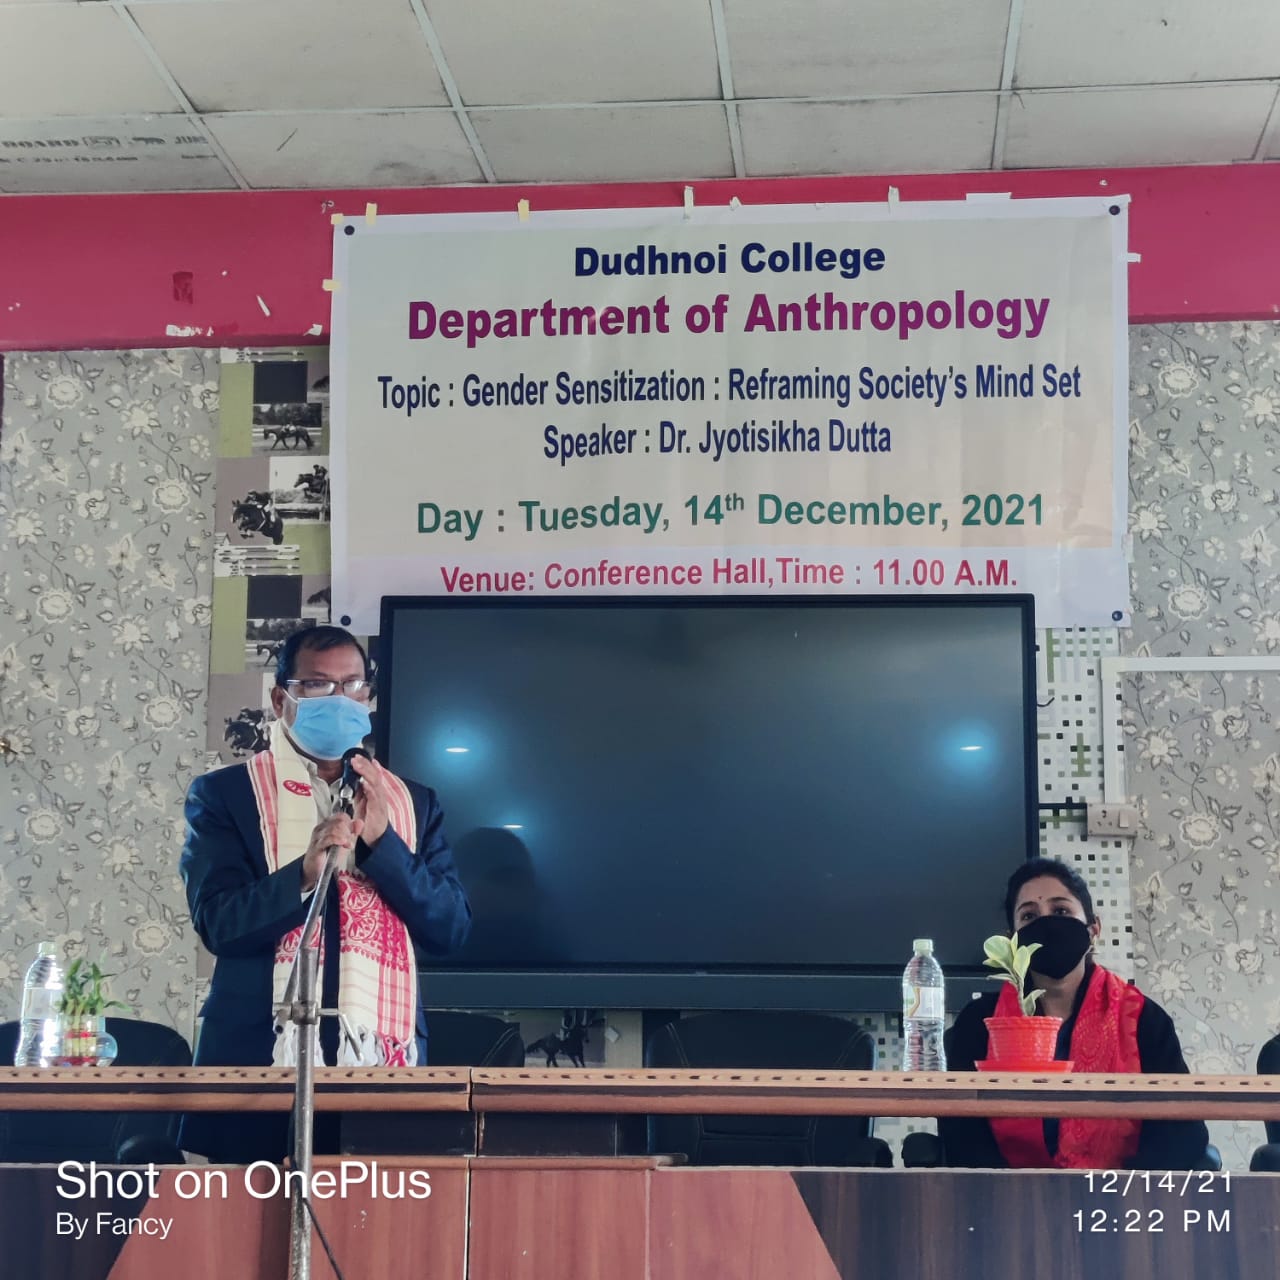 Dudhnoi College events